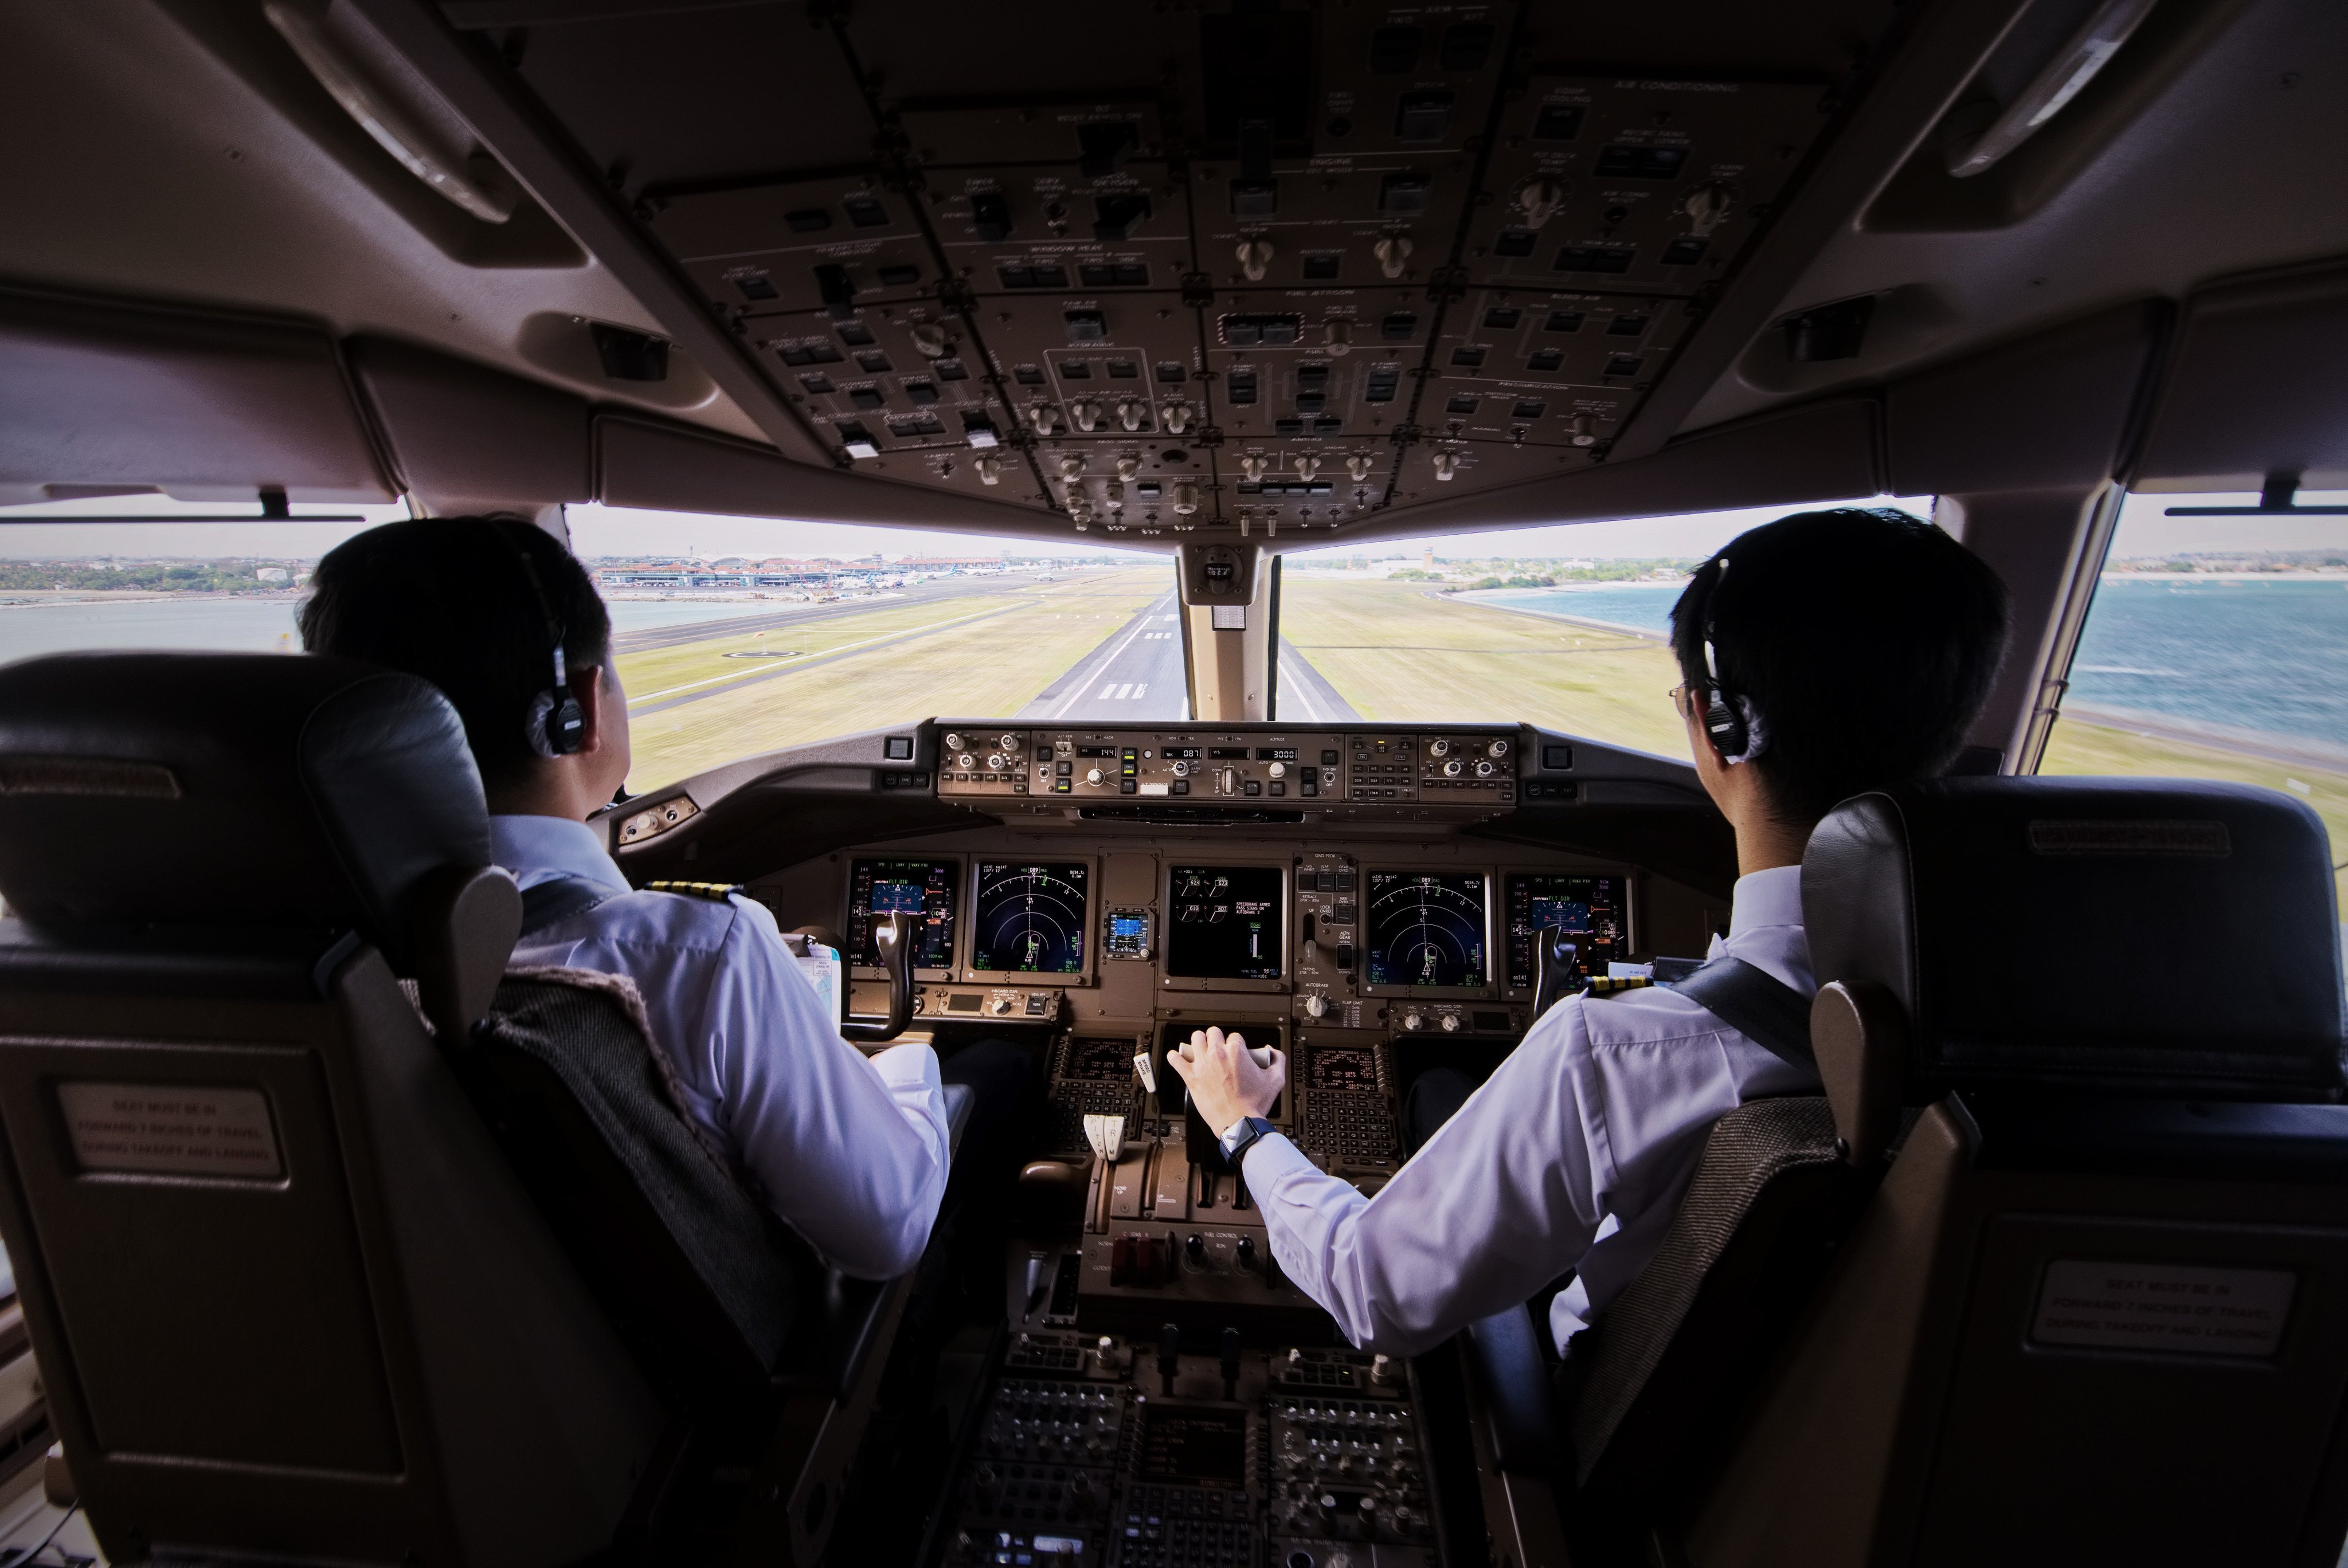 A new programme hopes to encourage more Hongkongers to become pilots. Photo: Shutterstock